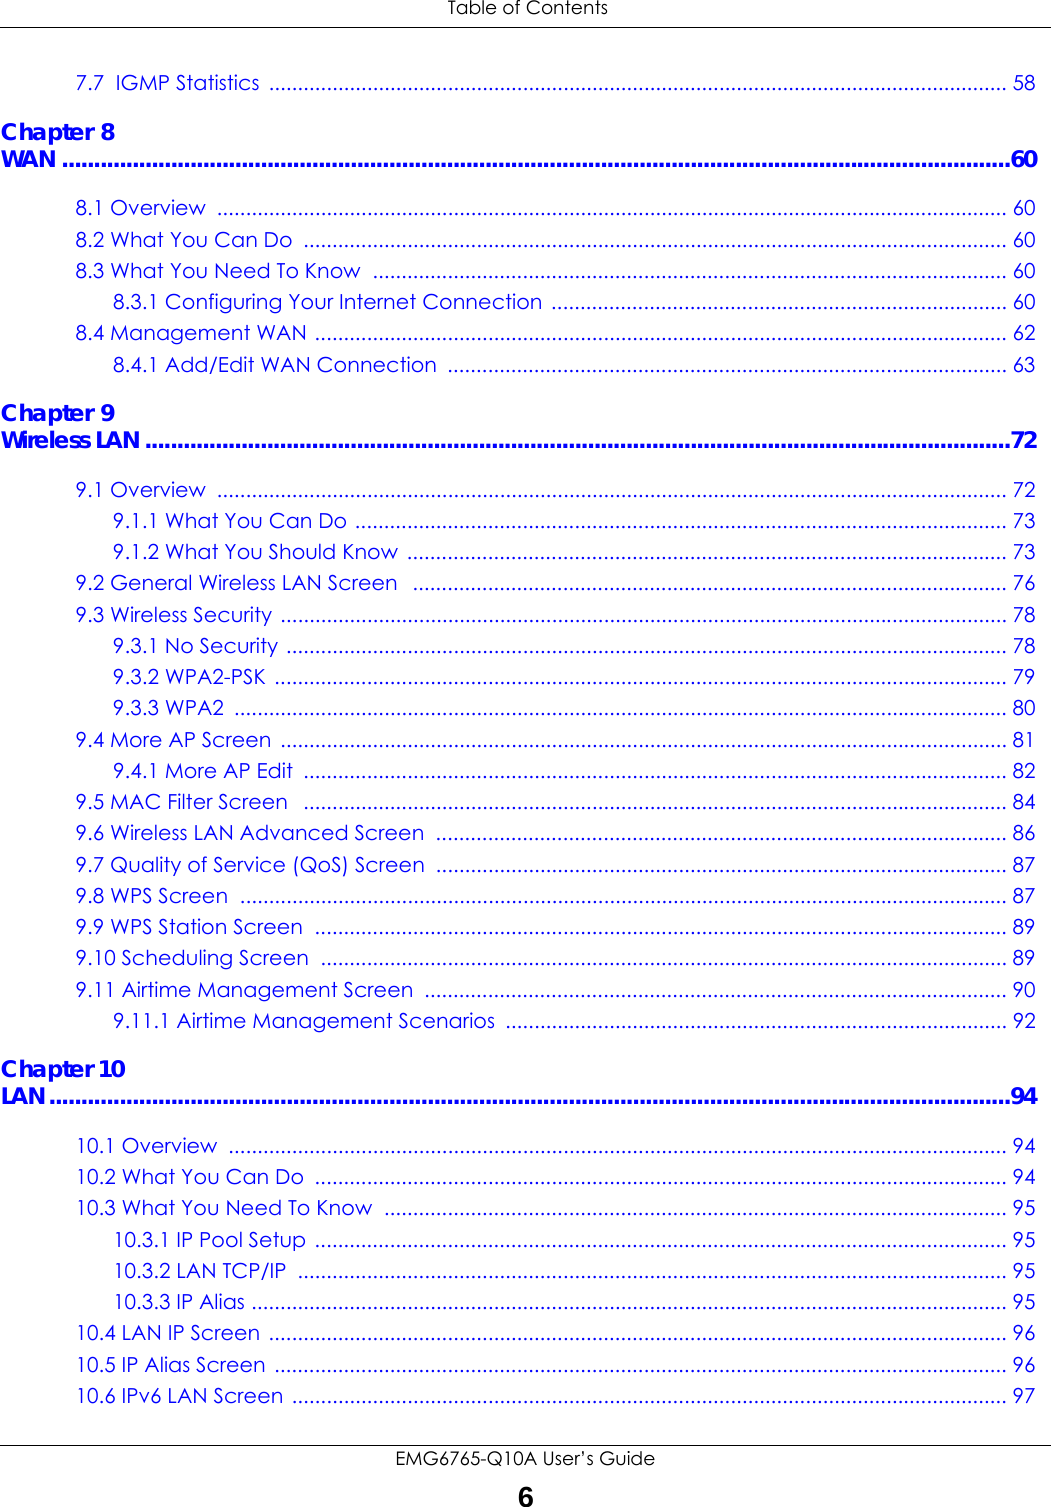 Table of ContentsEMG6765-Q10A User’s Guide67.7  IGMP Statistics  ................................................................................................................................ 58Chapter 8WAN ....................................................................................................................................................608.1 Overview  ......................................................................................................................................... 608.2 What You Can Do  .......................................................................................................................... 608.3 What You Need To Know  .............................................................................................................. 608.3.1 Configuring Your Internet Connection ............................................................................... 608.4 Management WAN ........................................................................................................................ 628.4.1 Add/Edit WAN Connection  ................................................................................................. 63Chapter 9Wireless LAN .......................................................................................................................................729.1 Overview  ......................................................................................................................................... 729.1.1 What You Can Do ................................................................................................................. 739.1.2 What You Should Know  ........................................................................................................ 739.2 General Wireless LAN Screen   ....................................................................................................... 769.3 Wireless Security .............................................................................................................................. 789.3.1 No Security ............................................................................................................................. 789.3.2 WPA2-PSK ............................................................................................................................... 799.3.3 WPA2  ...................................................................................................................................... 809.4 More AP Screen  .............................................................................................................................. 819.4.1 More AP Edit  .......................................................................................................................... 829.5 MAC Filter Screen   .......................................................................................................................... 849.6 Wireless LAN Advanced Screen  ................................................................................................... 869.7 Quality of Service (QoS) Screen  ................................................................................................... 879.8 WPS Screen  ..................................................................................................................................... 879.9 WPS Station Screen  ........................................................................................................................ 899.10 Scheduling Screen  ....................................................................................................................... 899.11 Airtime Management Screen  ..................................................................................................... 909.11.1 Airtime Management Scenarios  ....................................................................................... 92Chapter 10LAN......................................................................................................................................................9410.1 Overview  ....................................................................................................................................... 9410.2 What You Can Do  ........................................................................................................................ 9410.3 What You Need To Know  ............................................................................................................ 9510.3.1 IP Pool Setup ........................................................................................................................ 9510.3.2 LAN TCP/IP  ........................................................................................................................... 9510.3.3 IP Alias ................................................................................................................................... 9510.4 LAN IP Screen ................................................................................................................................ 9610.5 IP Alias Screen ............................................................................................................................... 9610.6 IPv6 LAN Screen ............................................................................................................................ 97